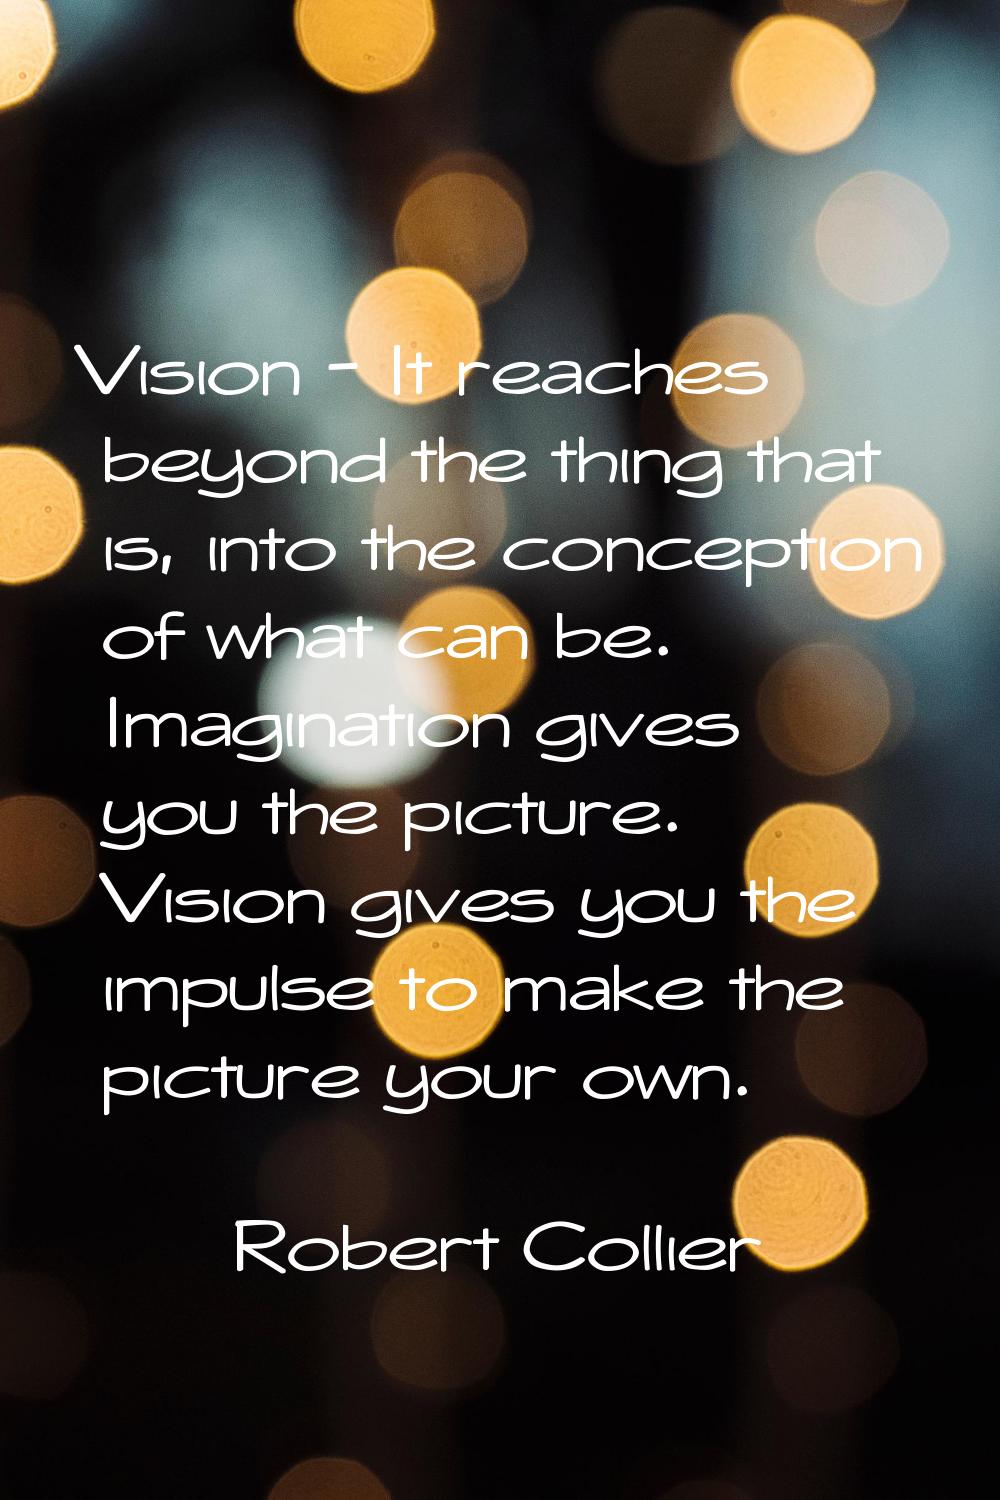 Vision - It reaches beyond the thing that is, into the conception of what can be. Imagination gives